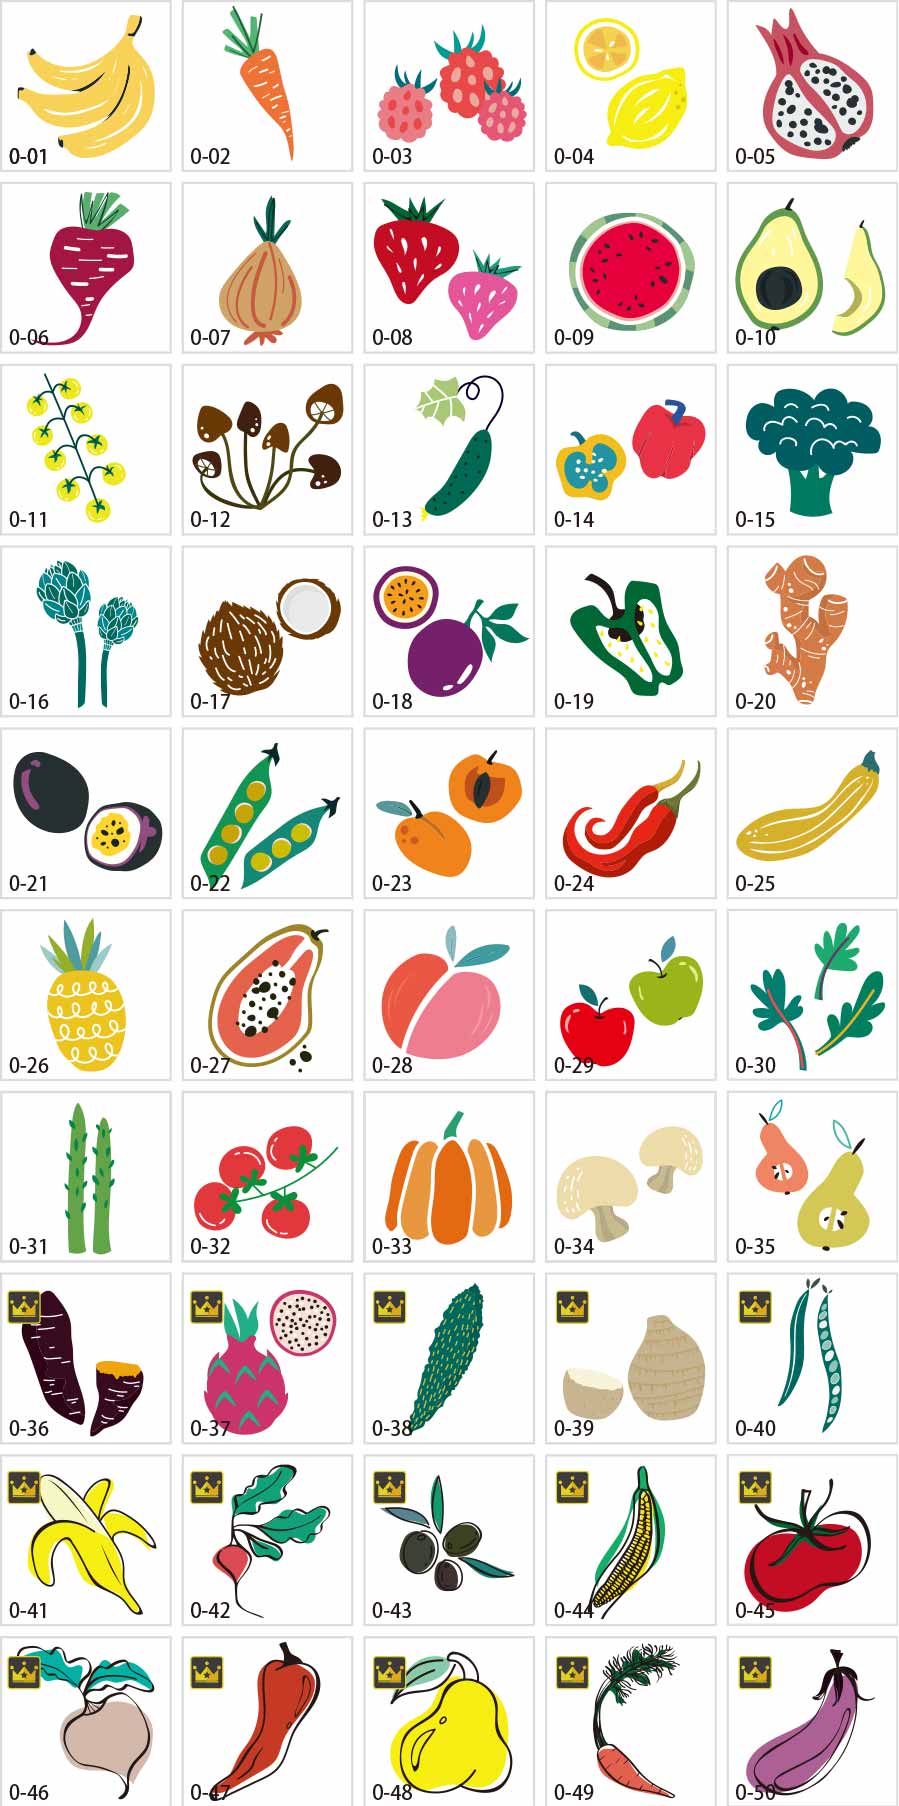 Illustration of fashionable vegetables and fruits